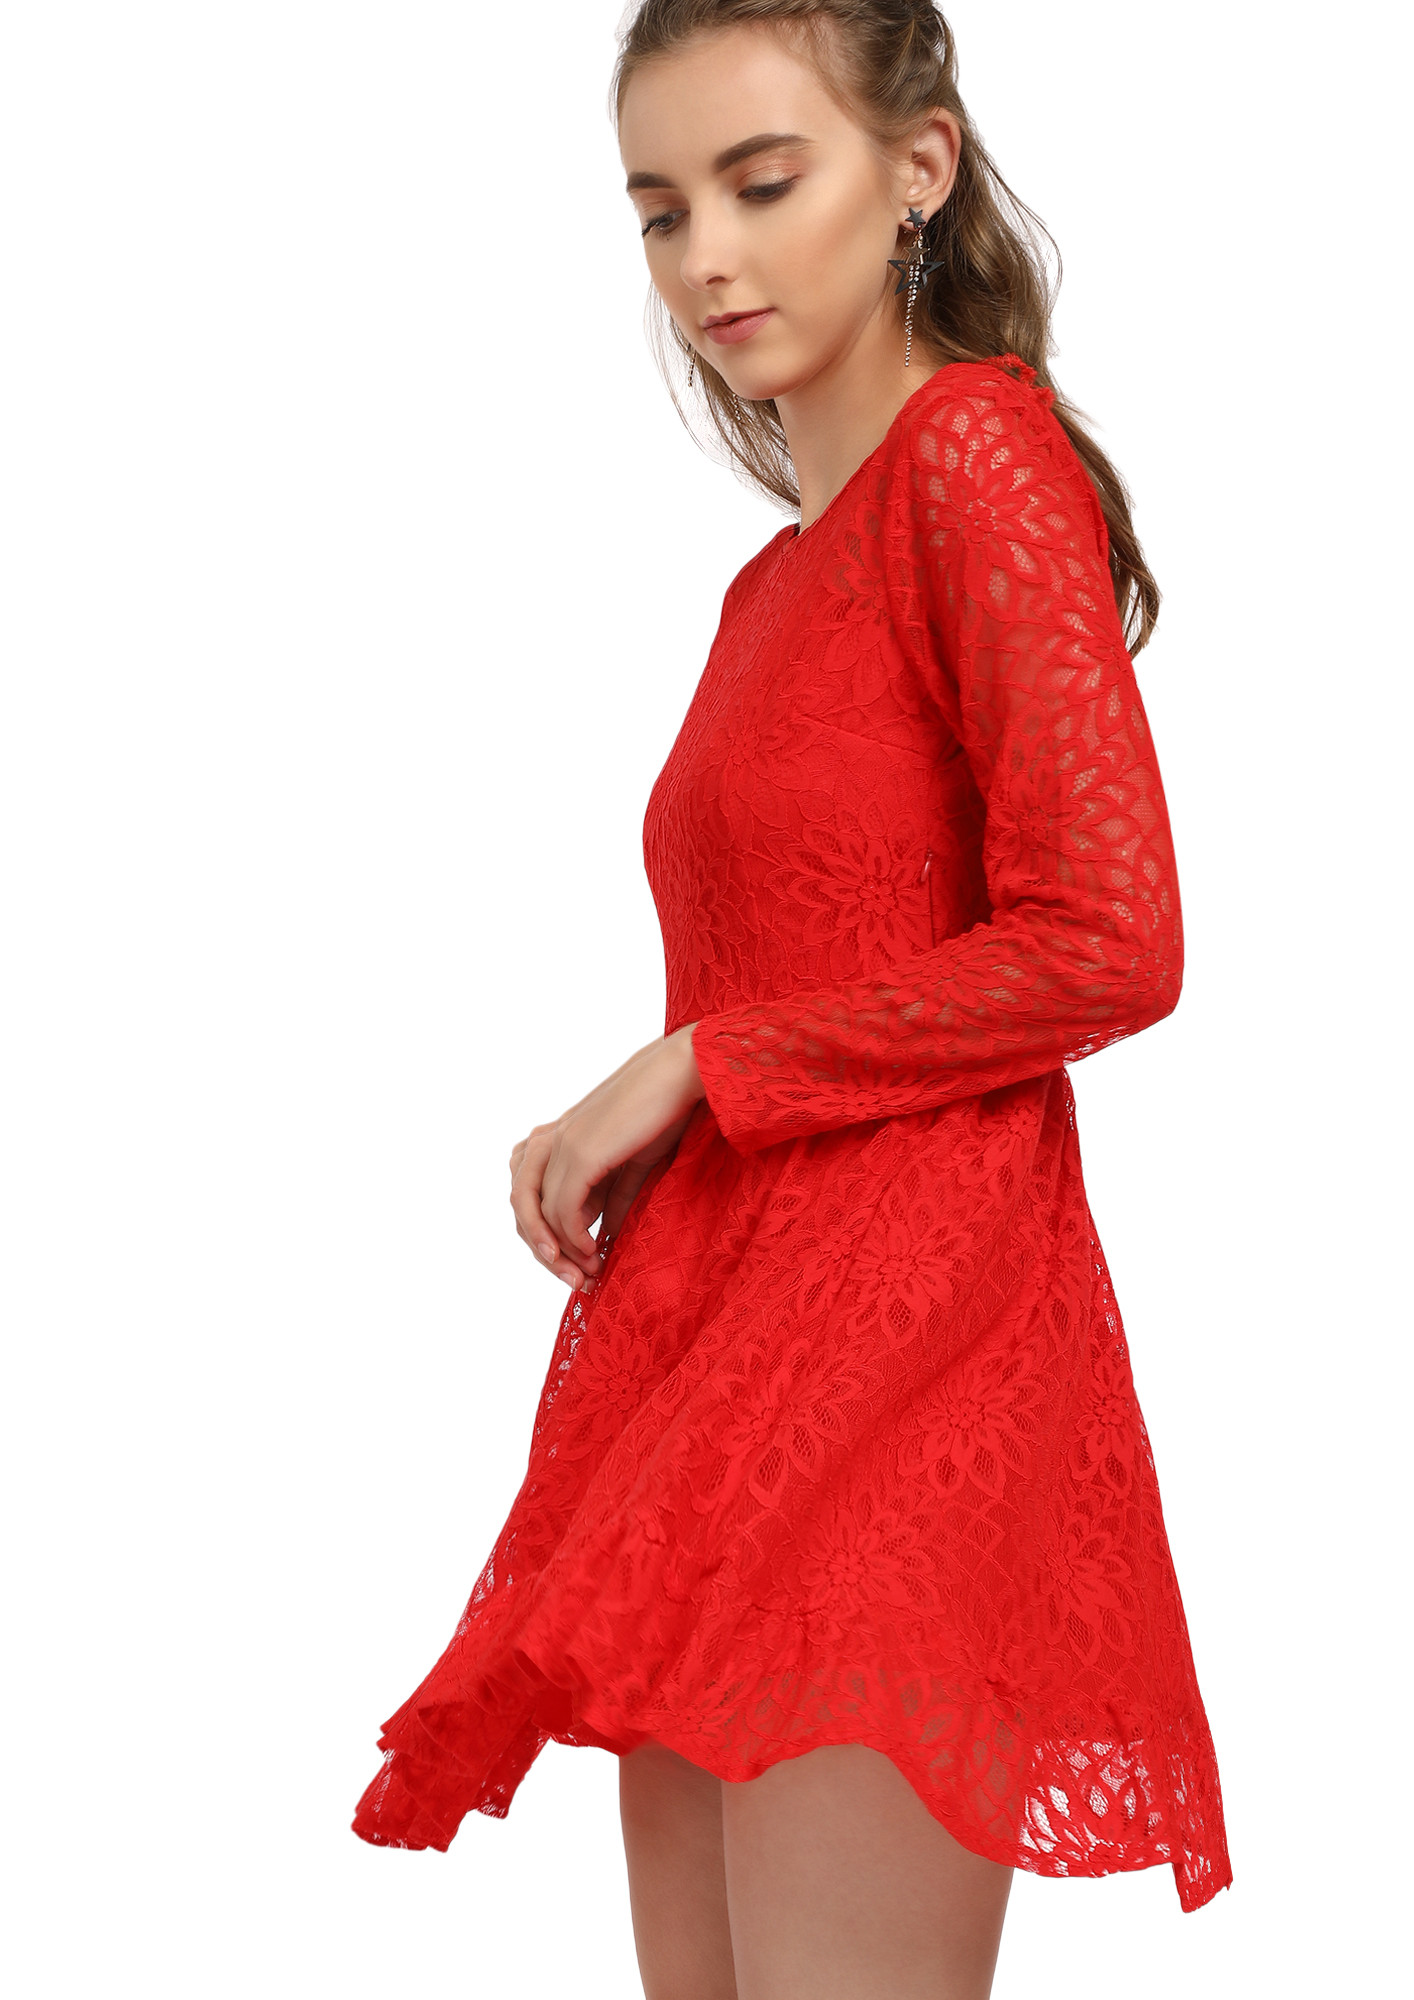 Harmony Bandeau Lace Dress Tights Set - Red